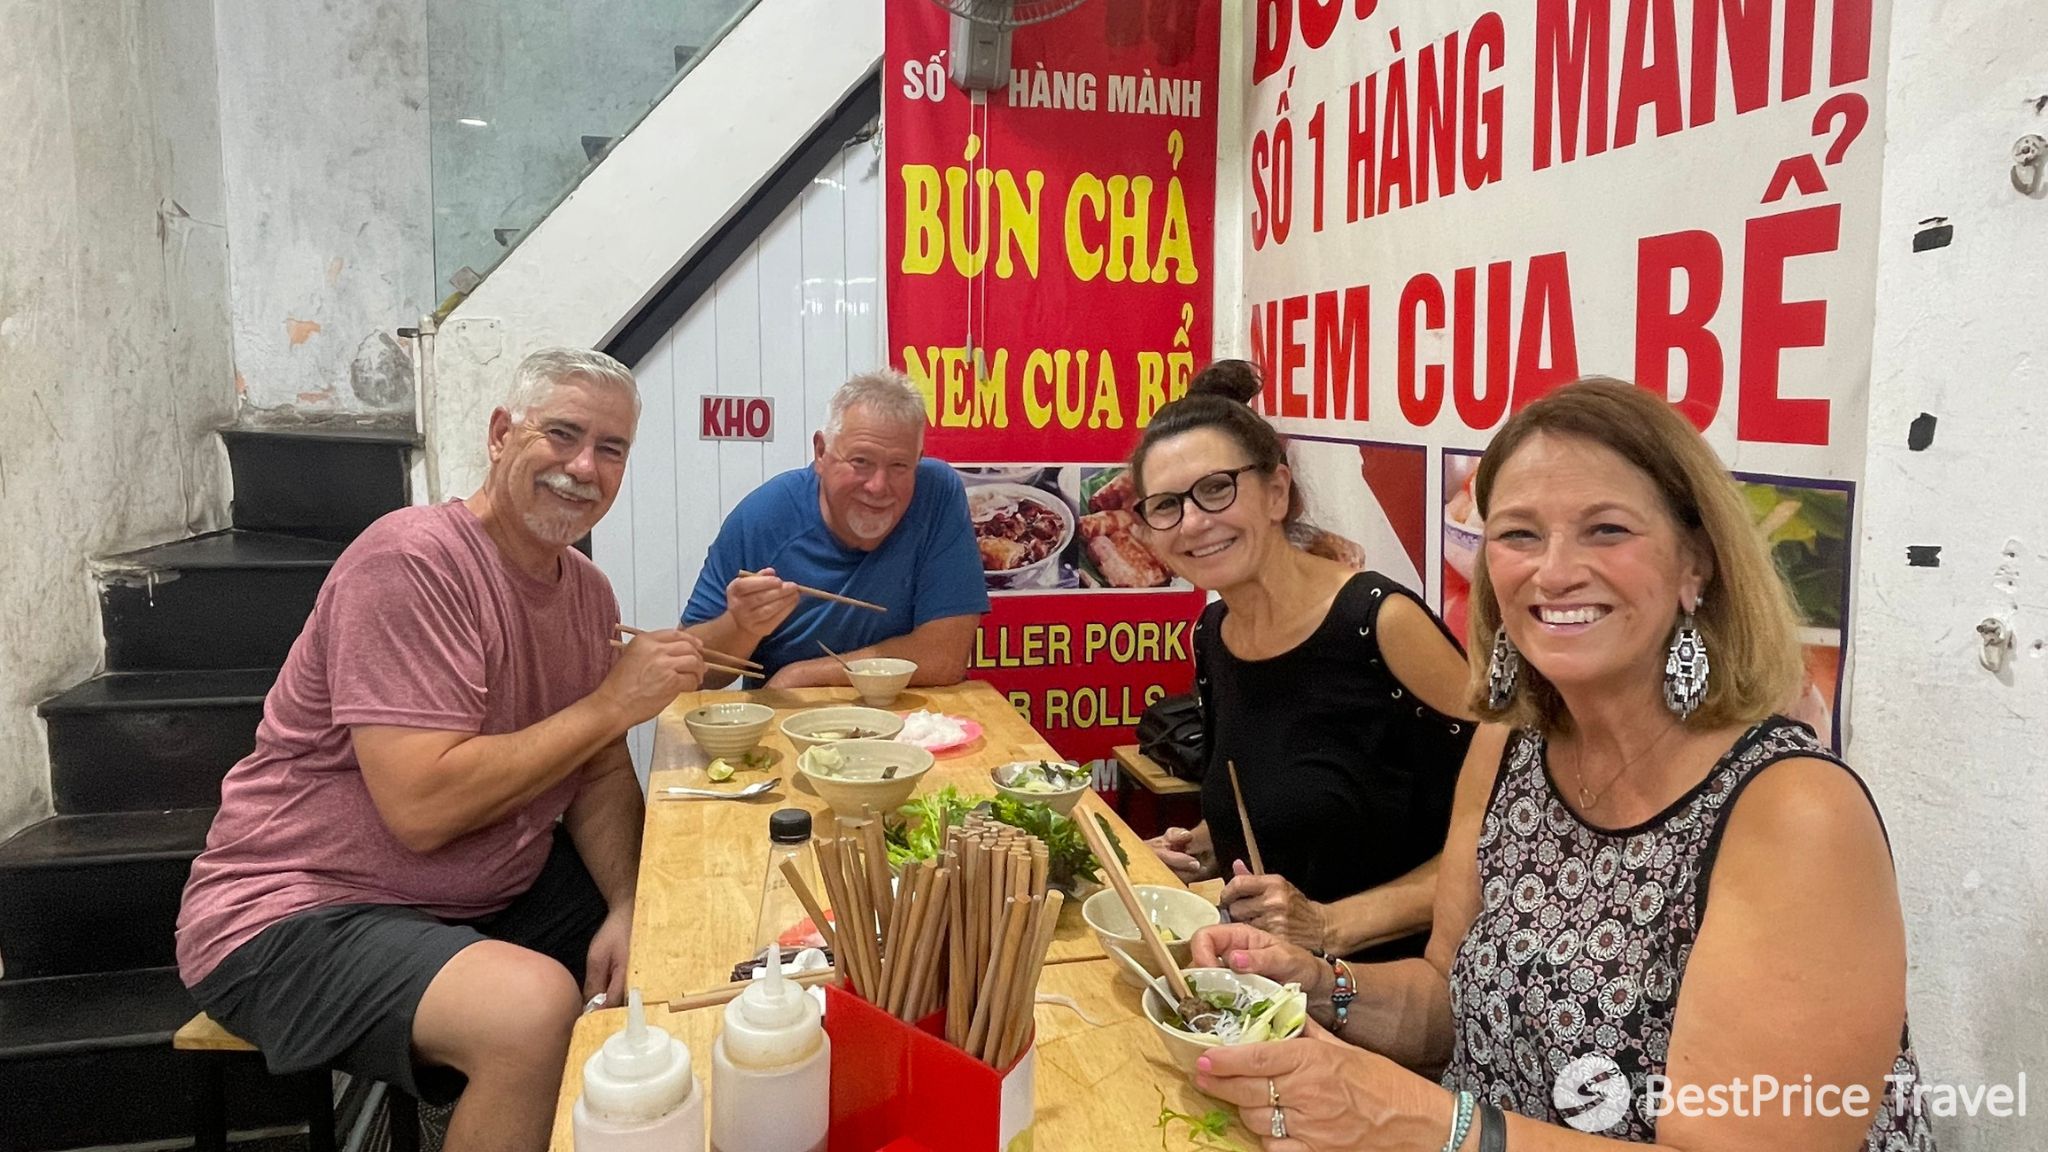 Day 1 Join A Food Tour To Explore Vietnamese Cuisine